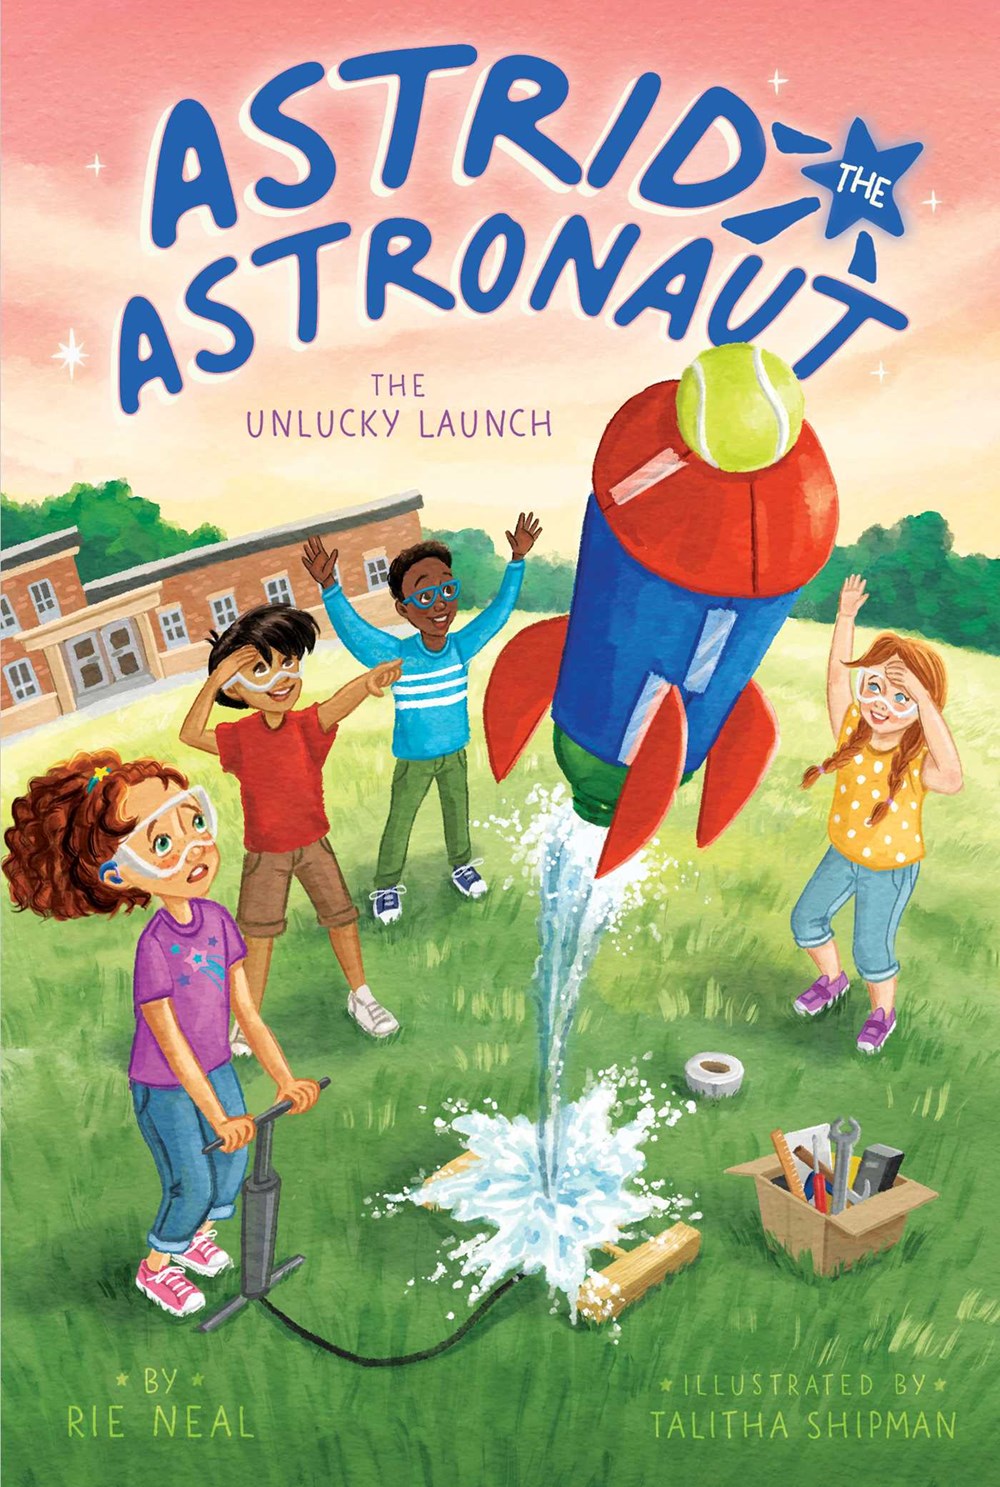 Astrid the Astronaut: The Unlucky Launch